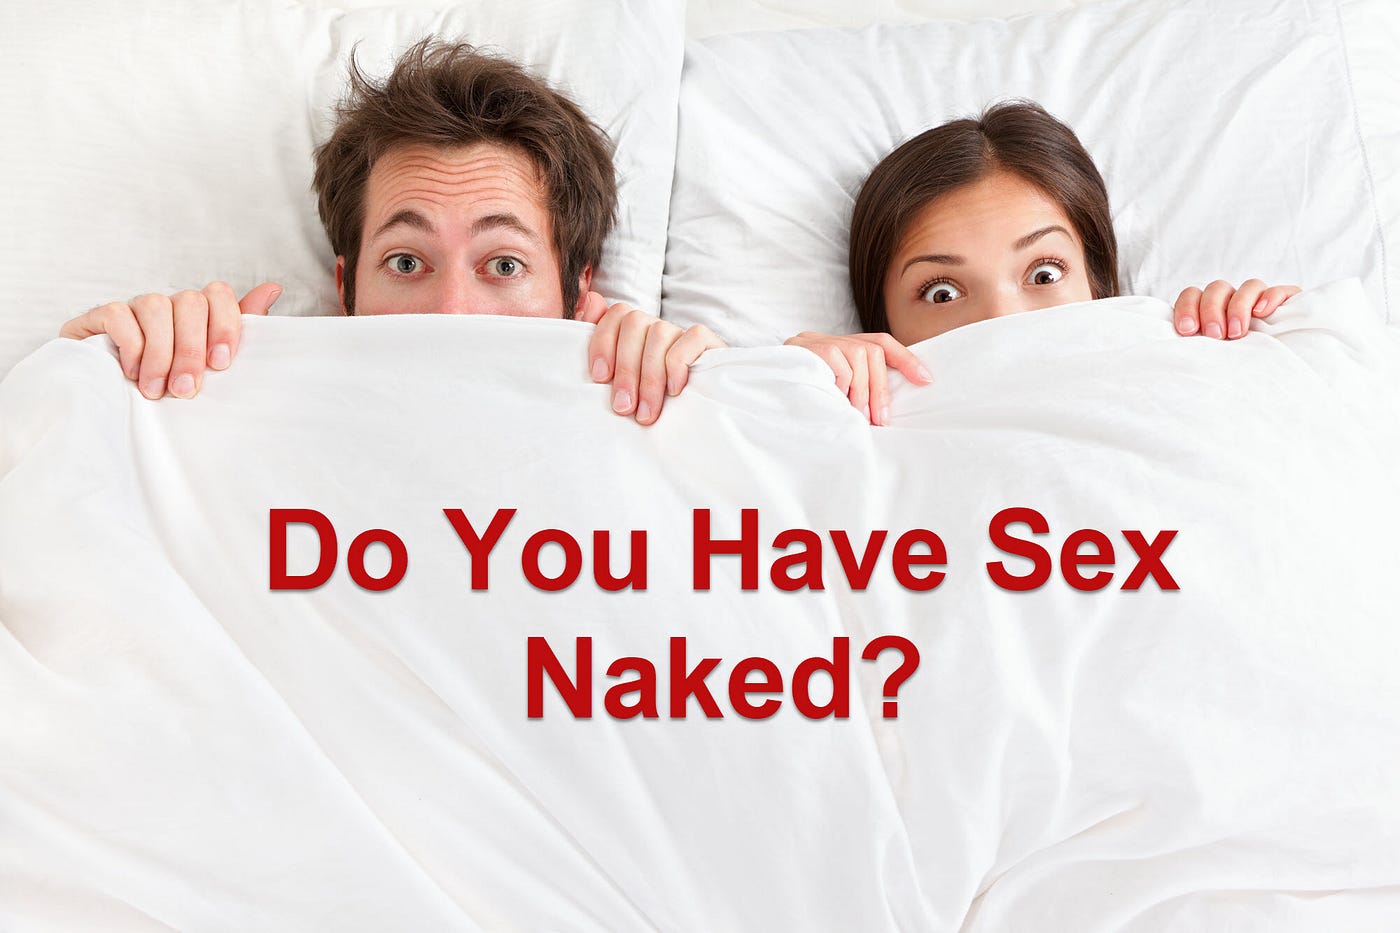 How To Have Sex Naked